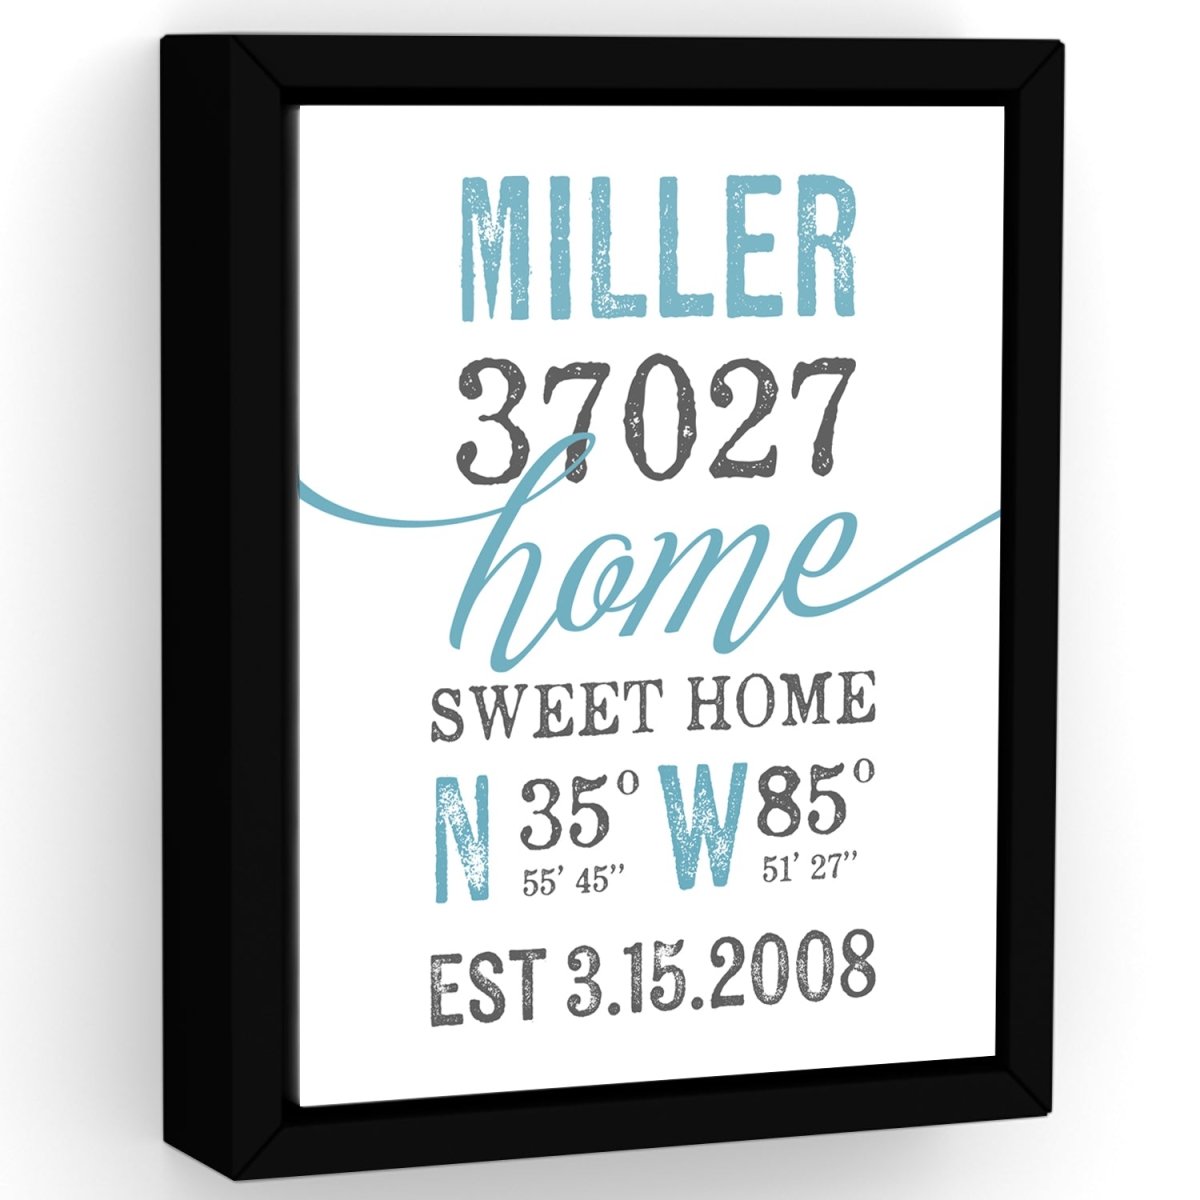 Custom Location Sign With Name and Zip Code - Pretty Perfect Studio